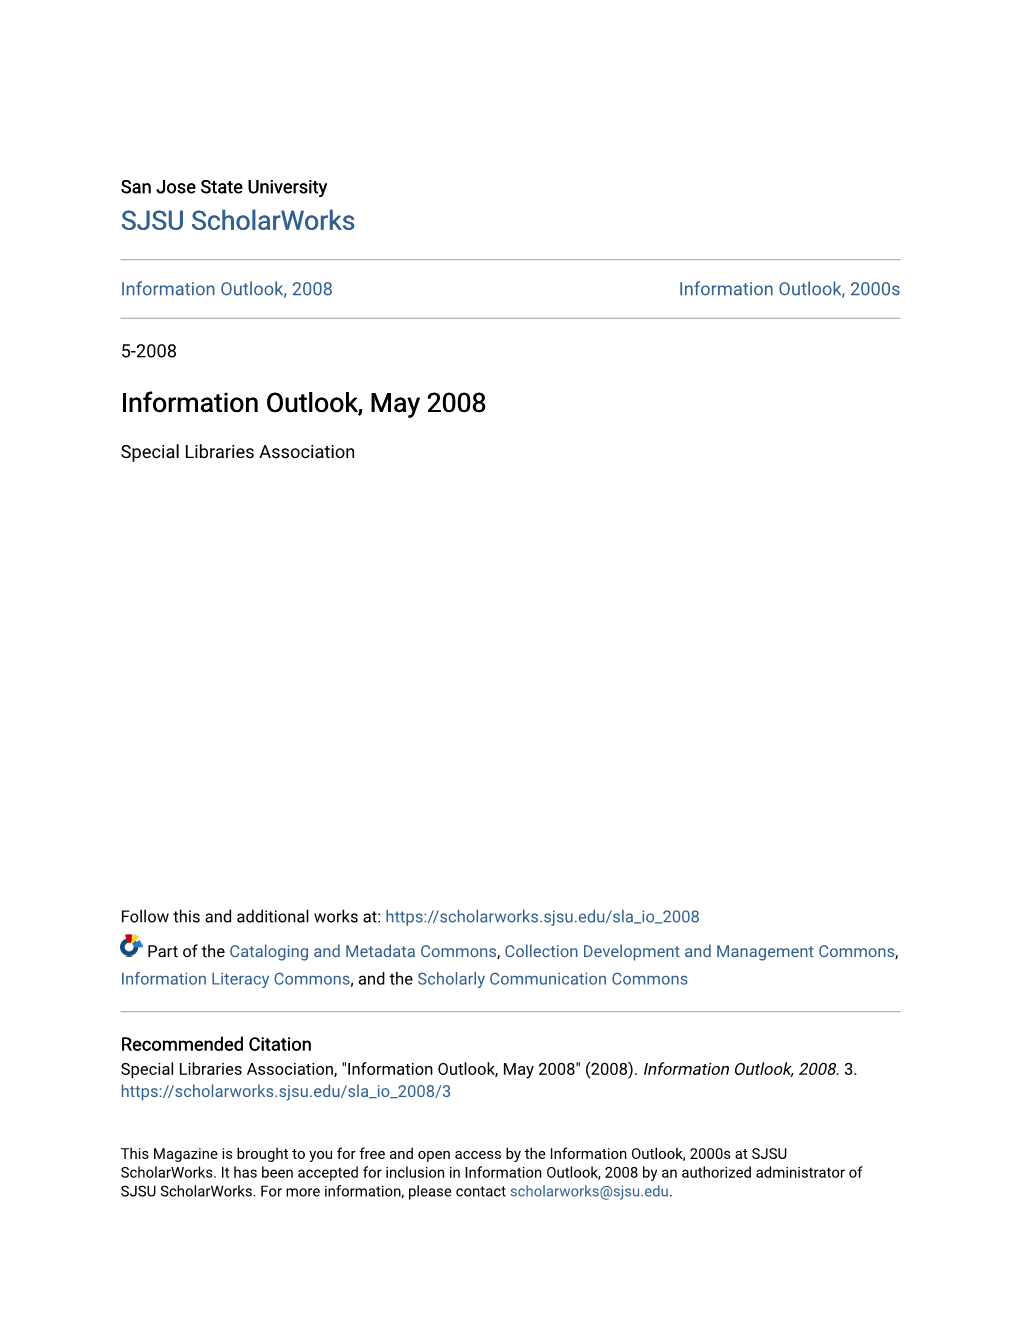 Information Outlook, May 2008